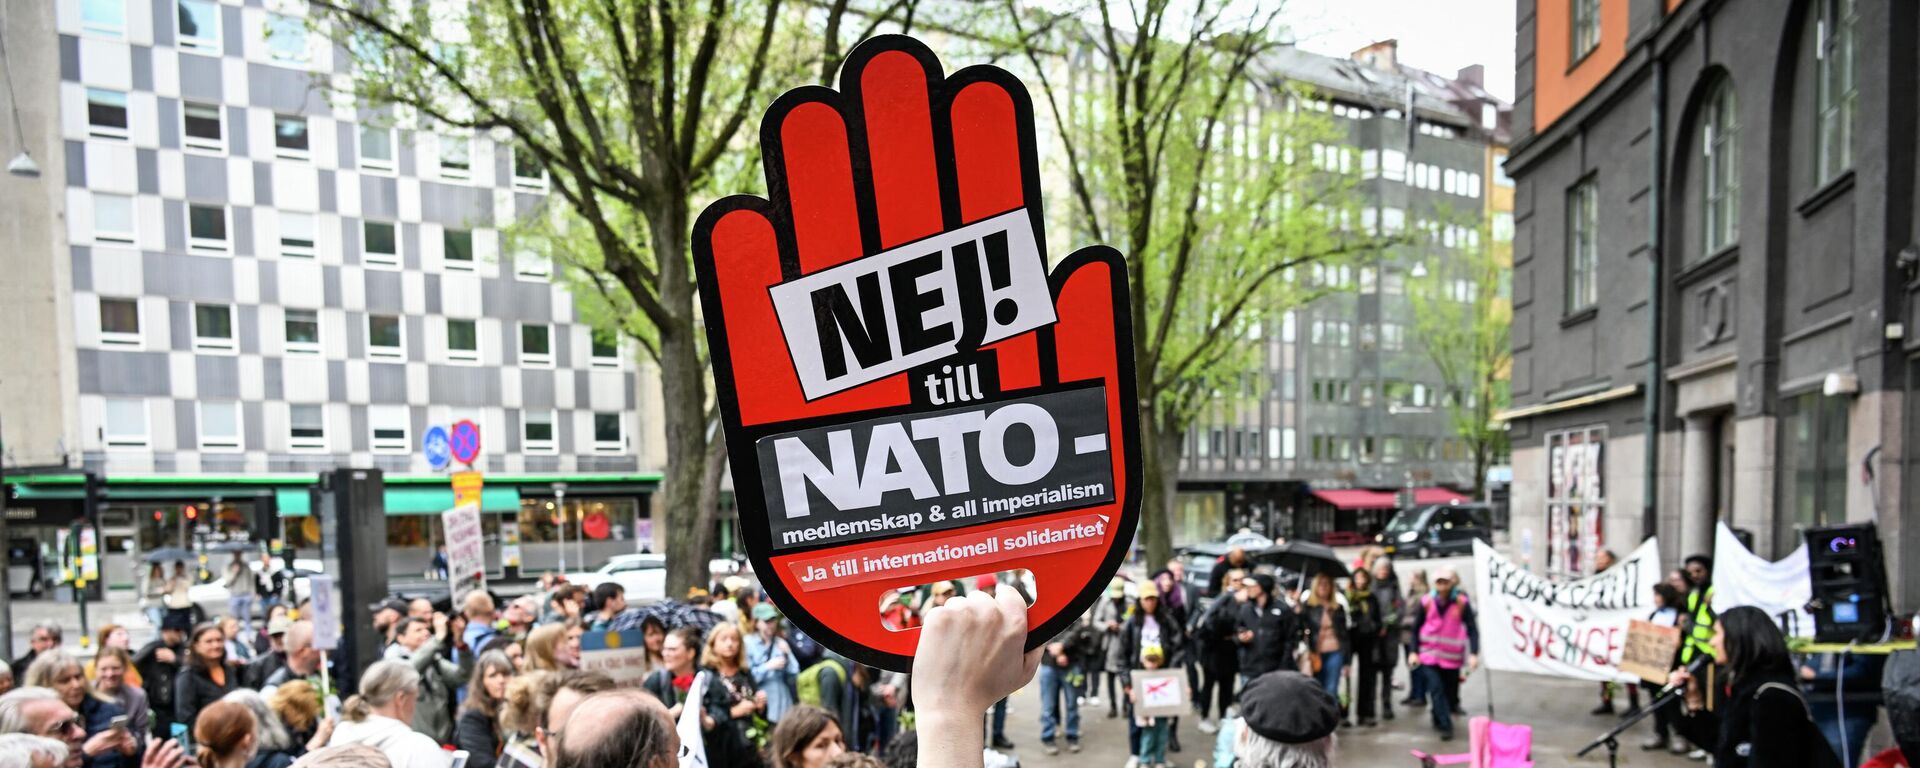 A few hundred protesters gather during a demonstration against a possible NATO membership of Sweden outside the ruling Social Democrats party's office in Stockholm, Sweden, on May 14, 2022. - Sputnik International, 1920, 18.05.2022